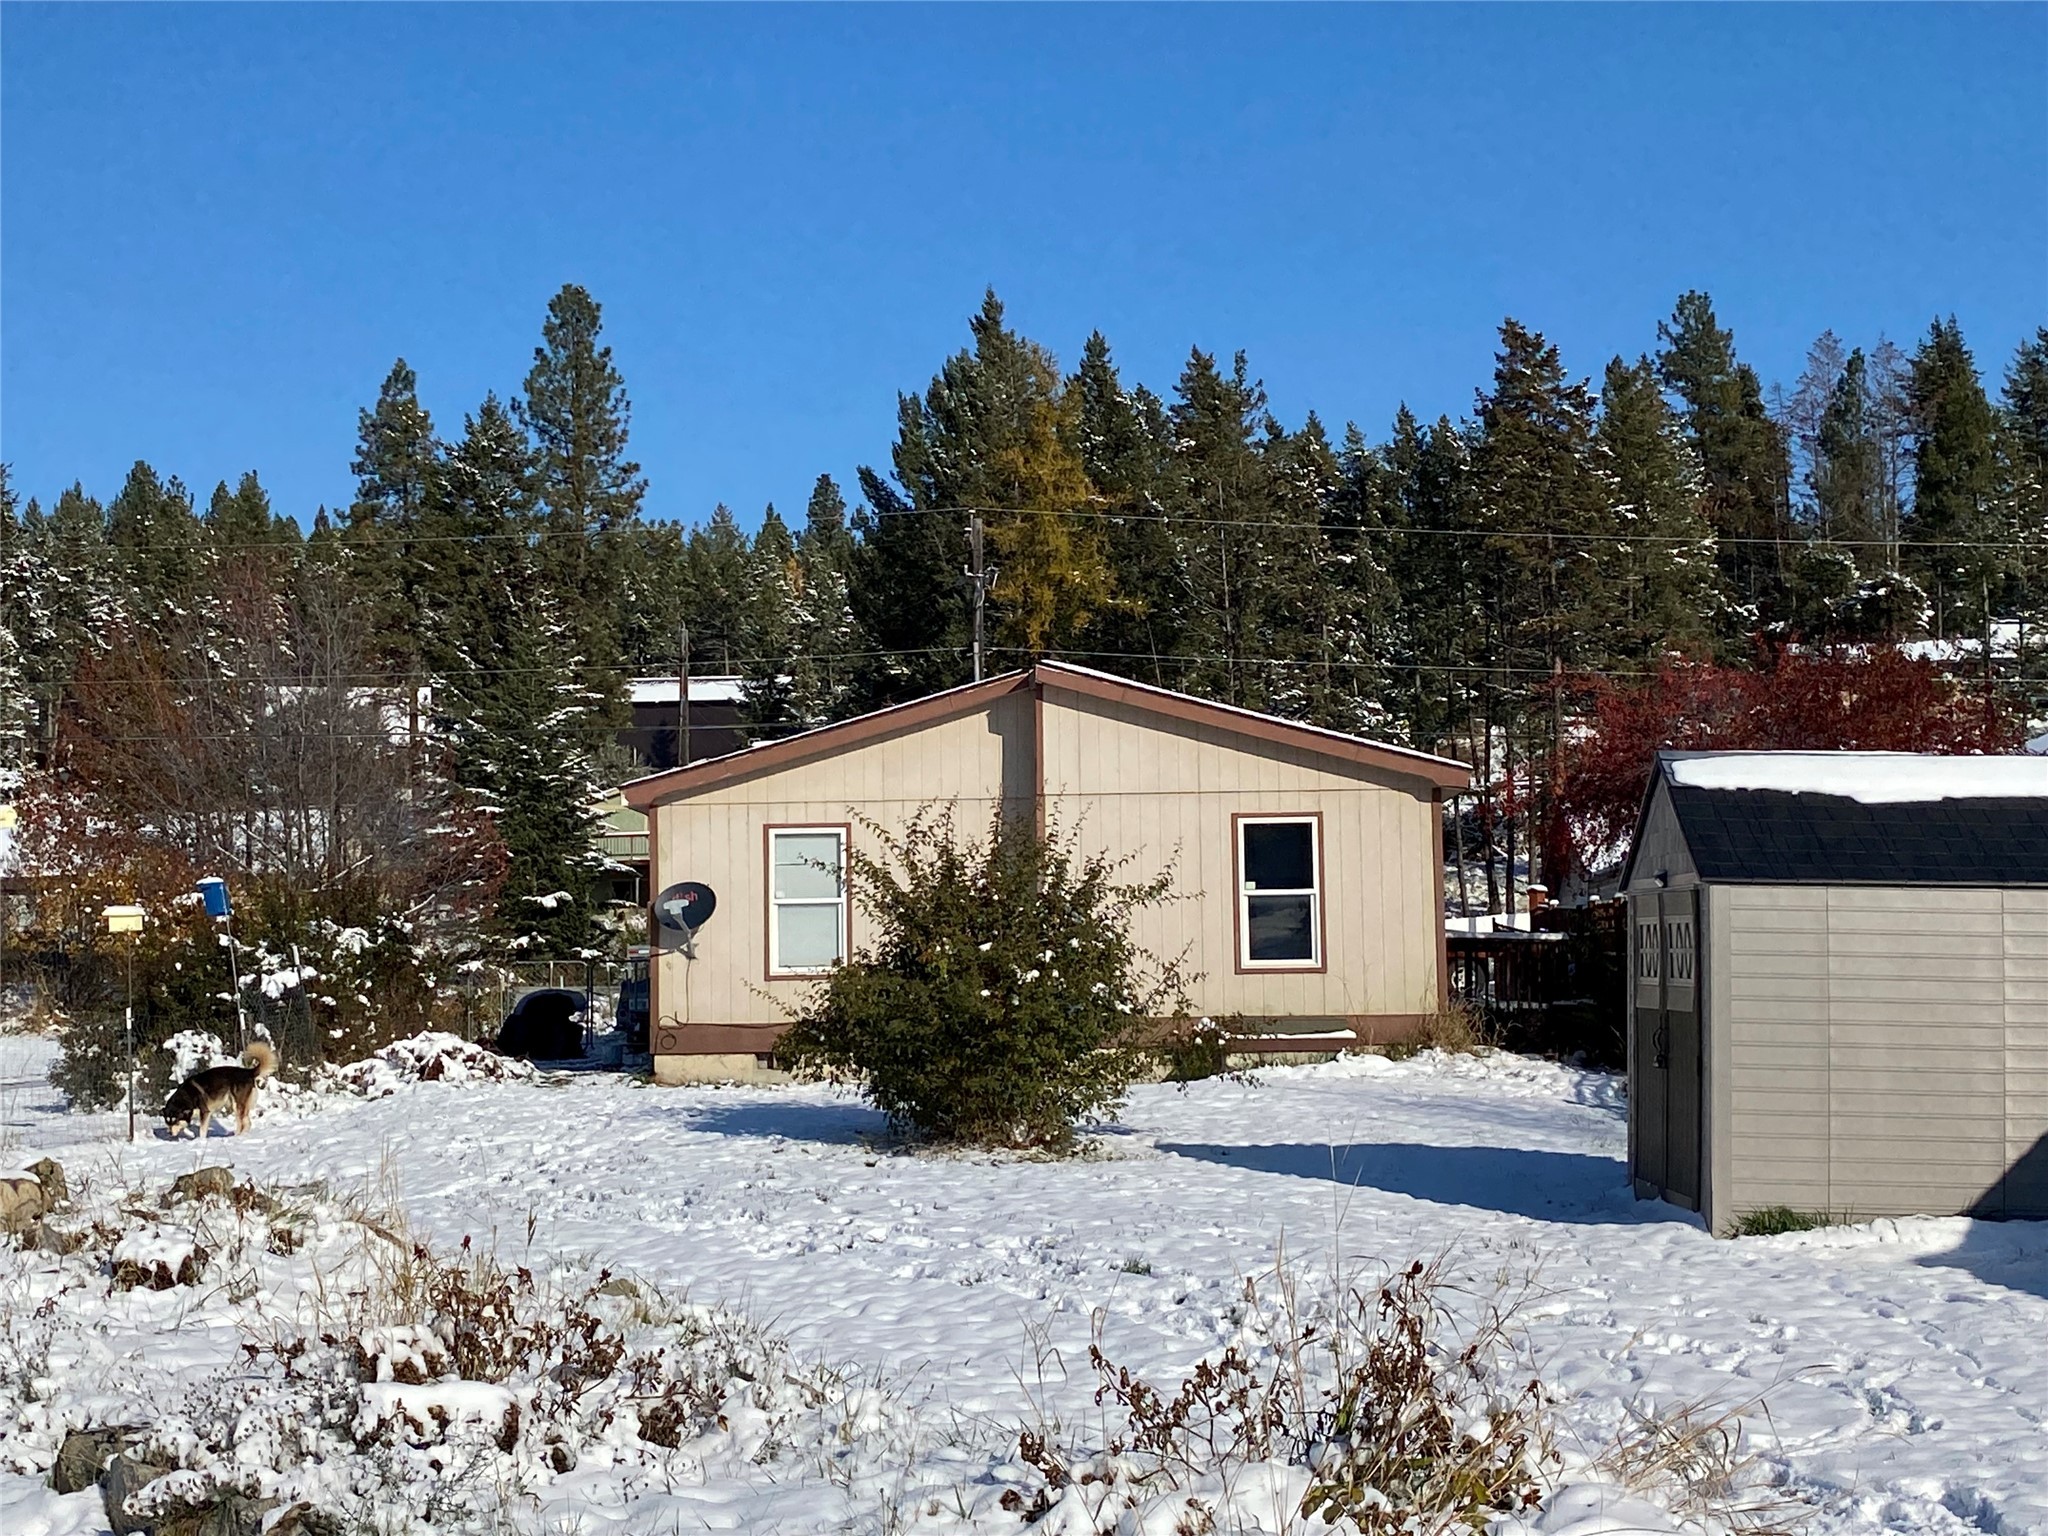 Welcome to Lakeside Montana and this 3 bedroom 2 bath manufactured home on a spacious 0.25-acre lot. Located just 2 blocks from the Flathead Lake public boat launch, the Veterans Public park and walking distance to town.  This home is perfect for those who enjoy living near the lake with all of the small town ambience. The roof was replaced just 3 months ago and this home sits on a permanent foundation. New appliances, kitchen and bathroom fixtures, and carpet throughout in 2018. Hot water tank and electric furnace were installed in 2019. Don't miss out on the opportunity to own a great home with many of the essential updates. Call Alice Brotnov at 406-229-0120, or your real estate professional.